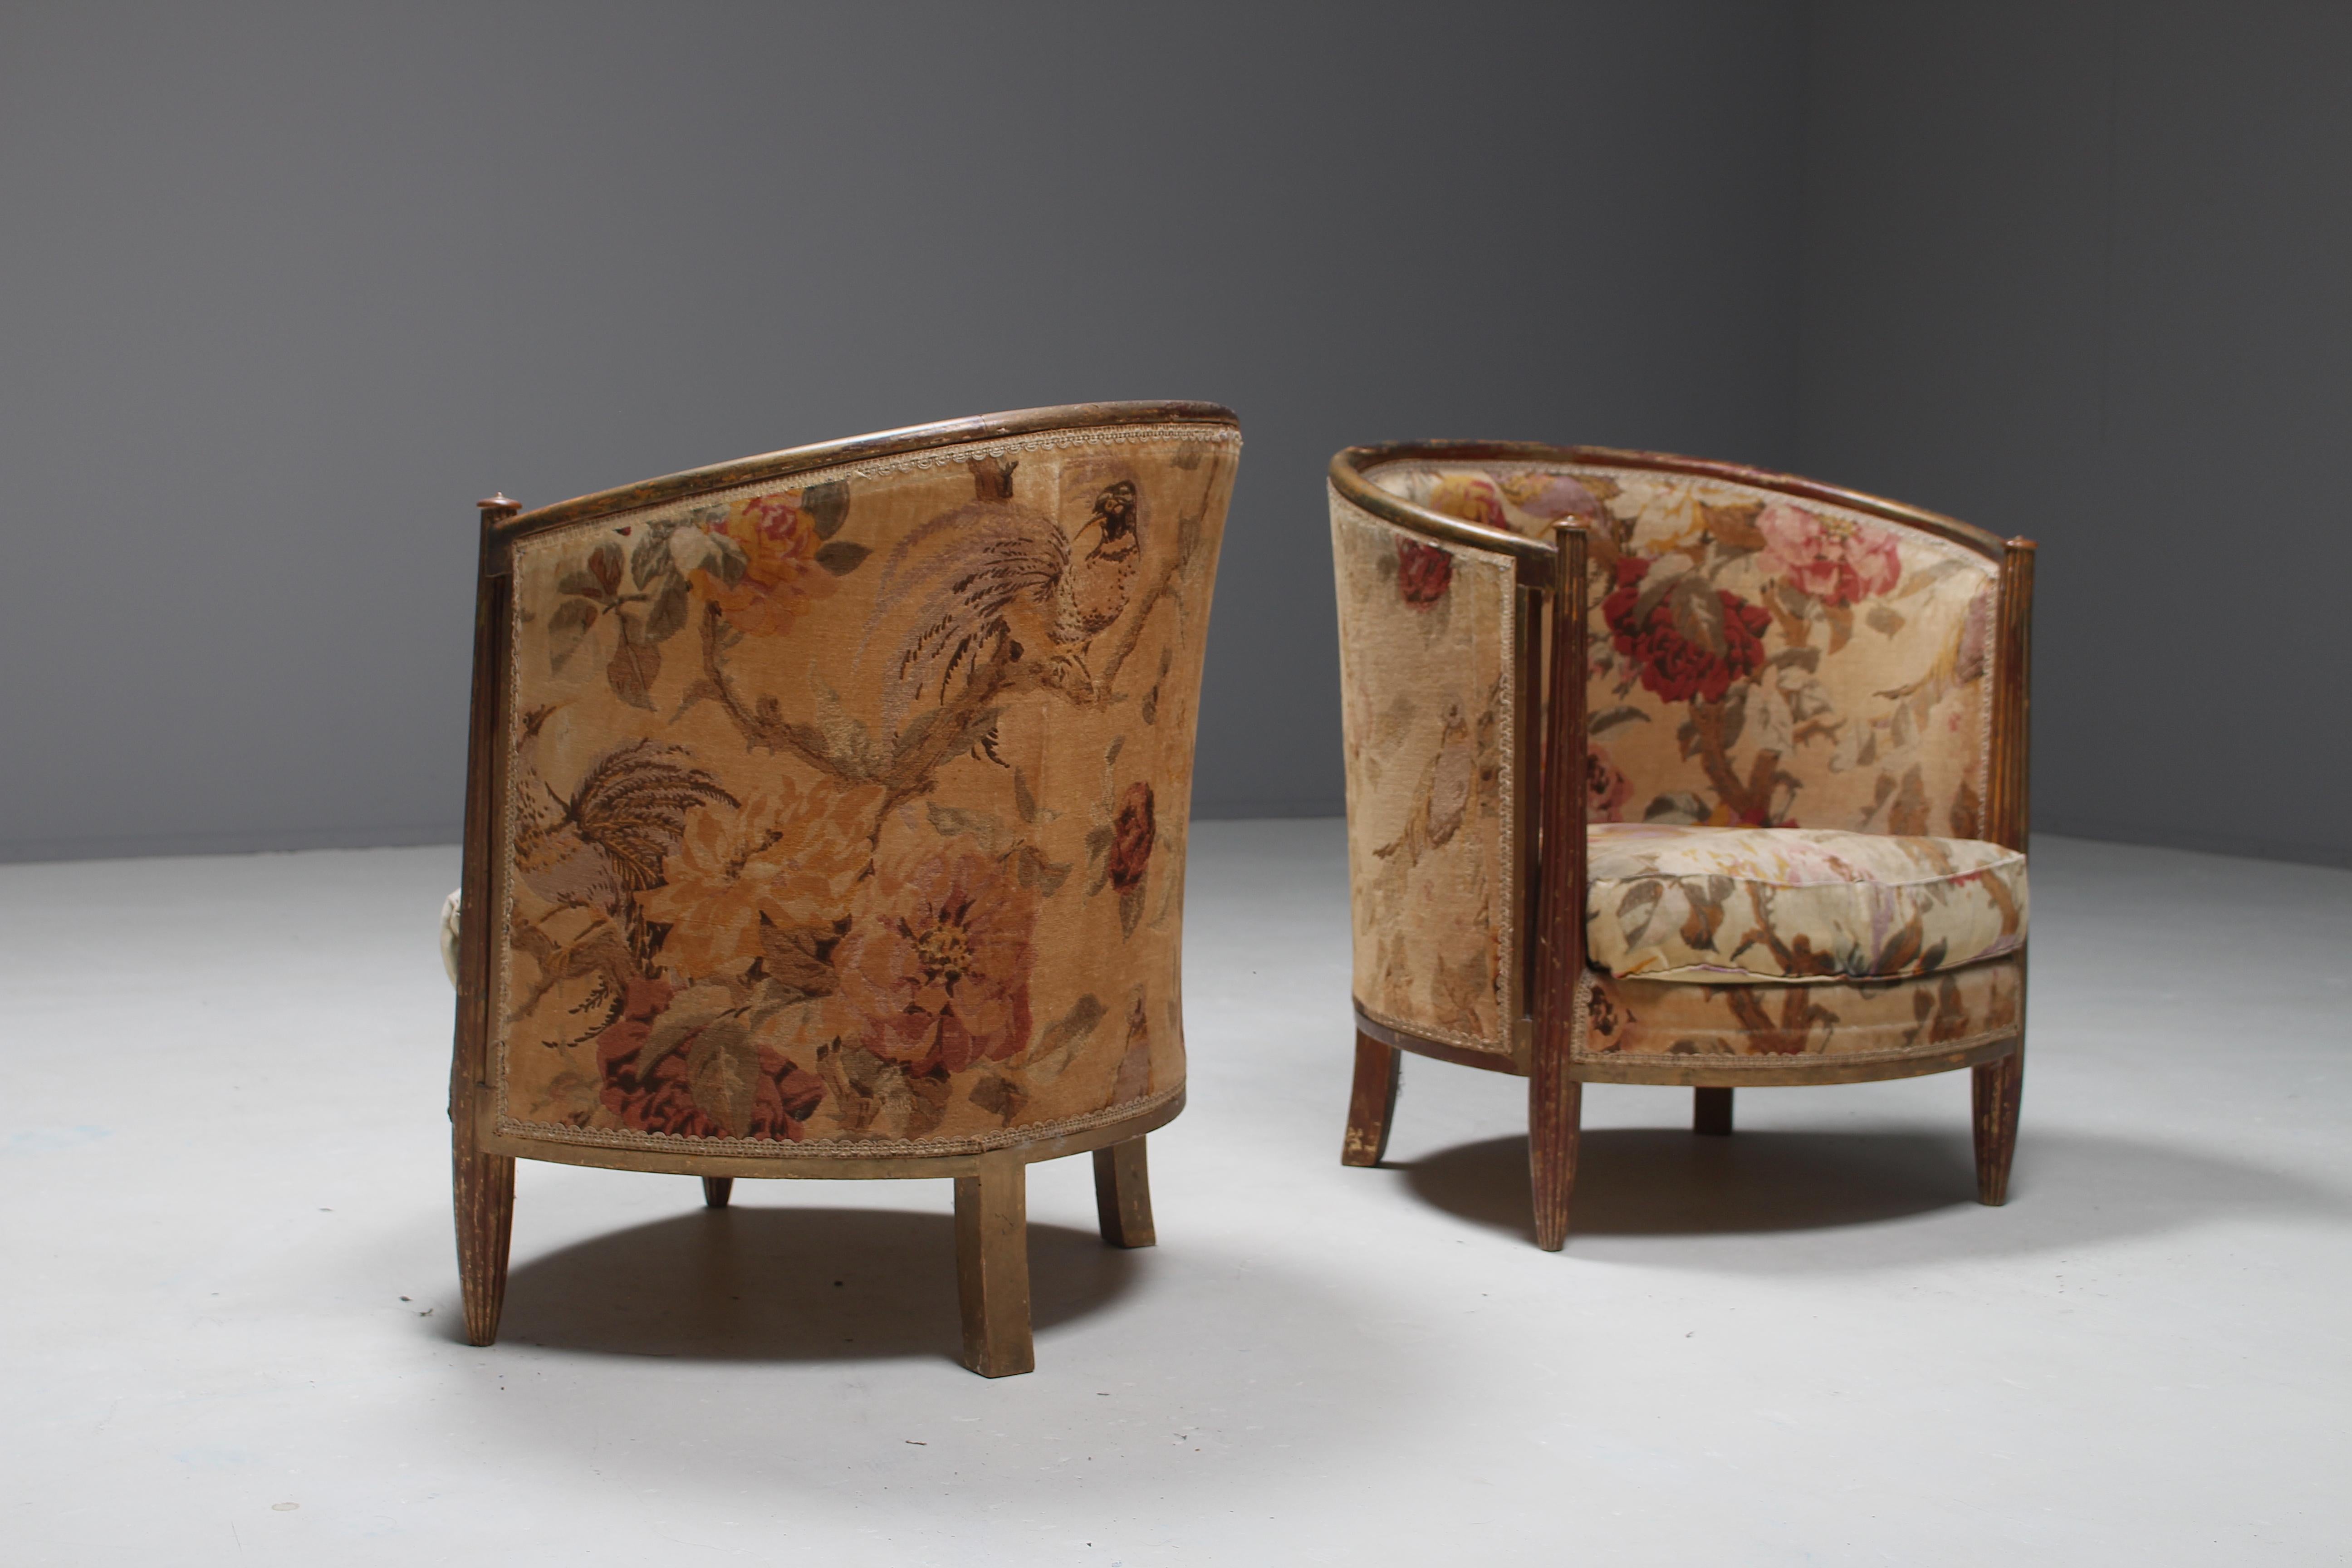 Important Early and Rare Gilded Paul Follot Art Nouveau Club Chairs, 1911 For Sale 1